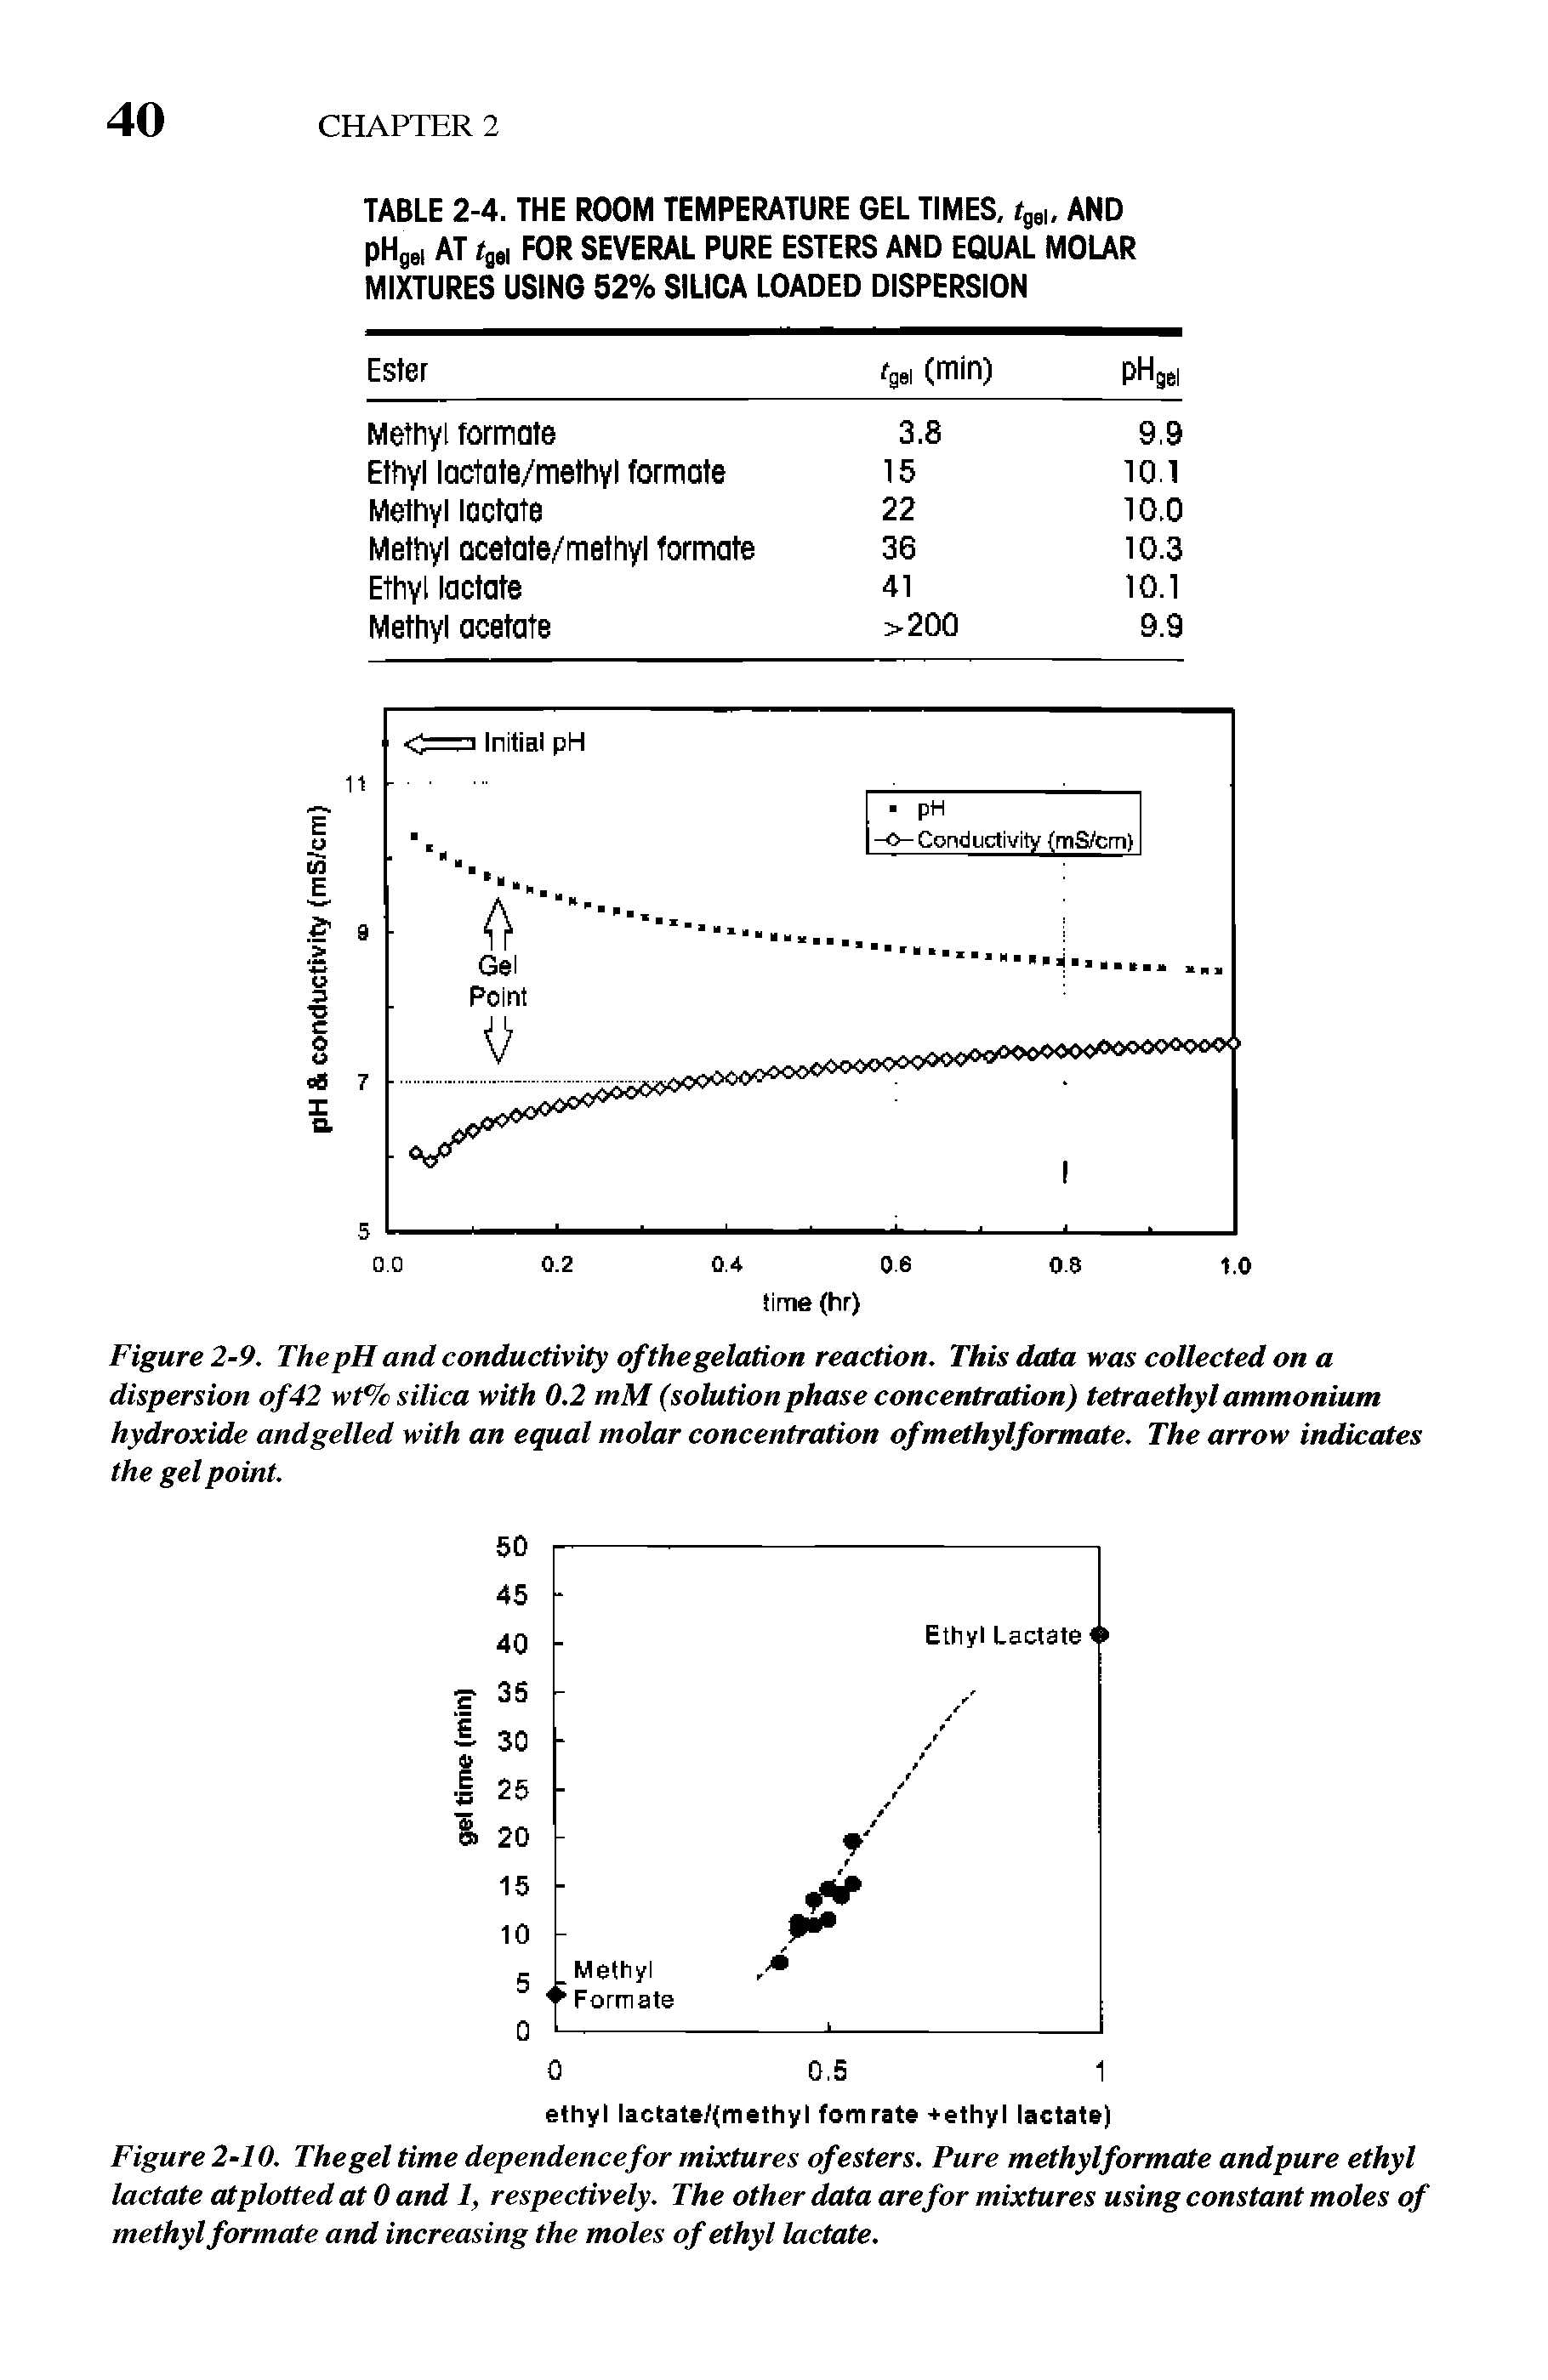 Figure 2-9. The pH and conductivity of the gelation reaction. This data was collected on a dispersion of42 wt c silica with 0.2 mM (solution phase concentration) tetraethyl ammonium hydroxide andgelled with an equal molar concentration ofmethylformate. The arrow indicates the gel point.